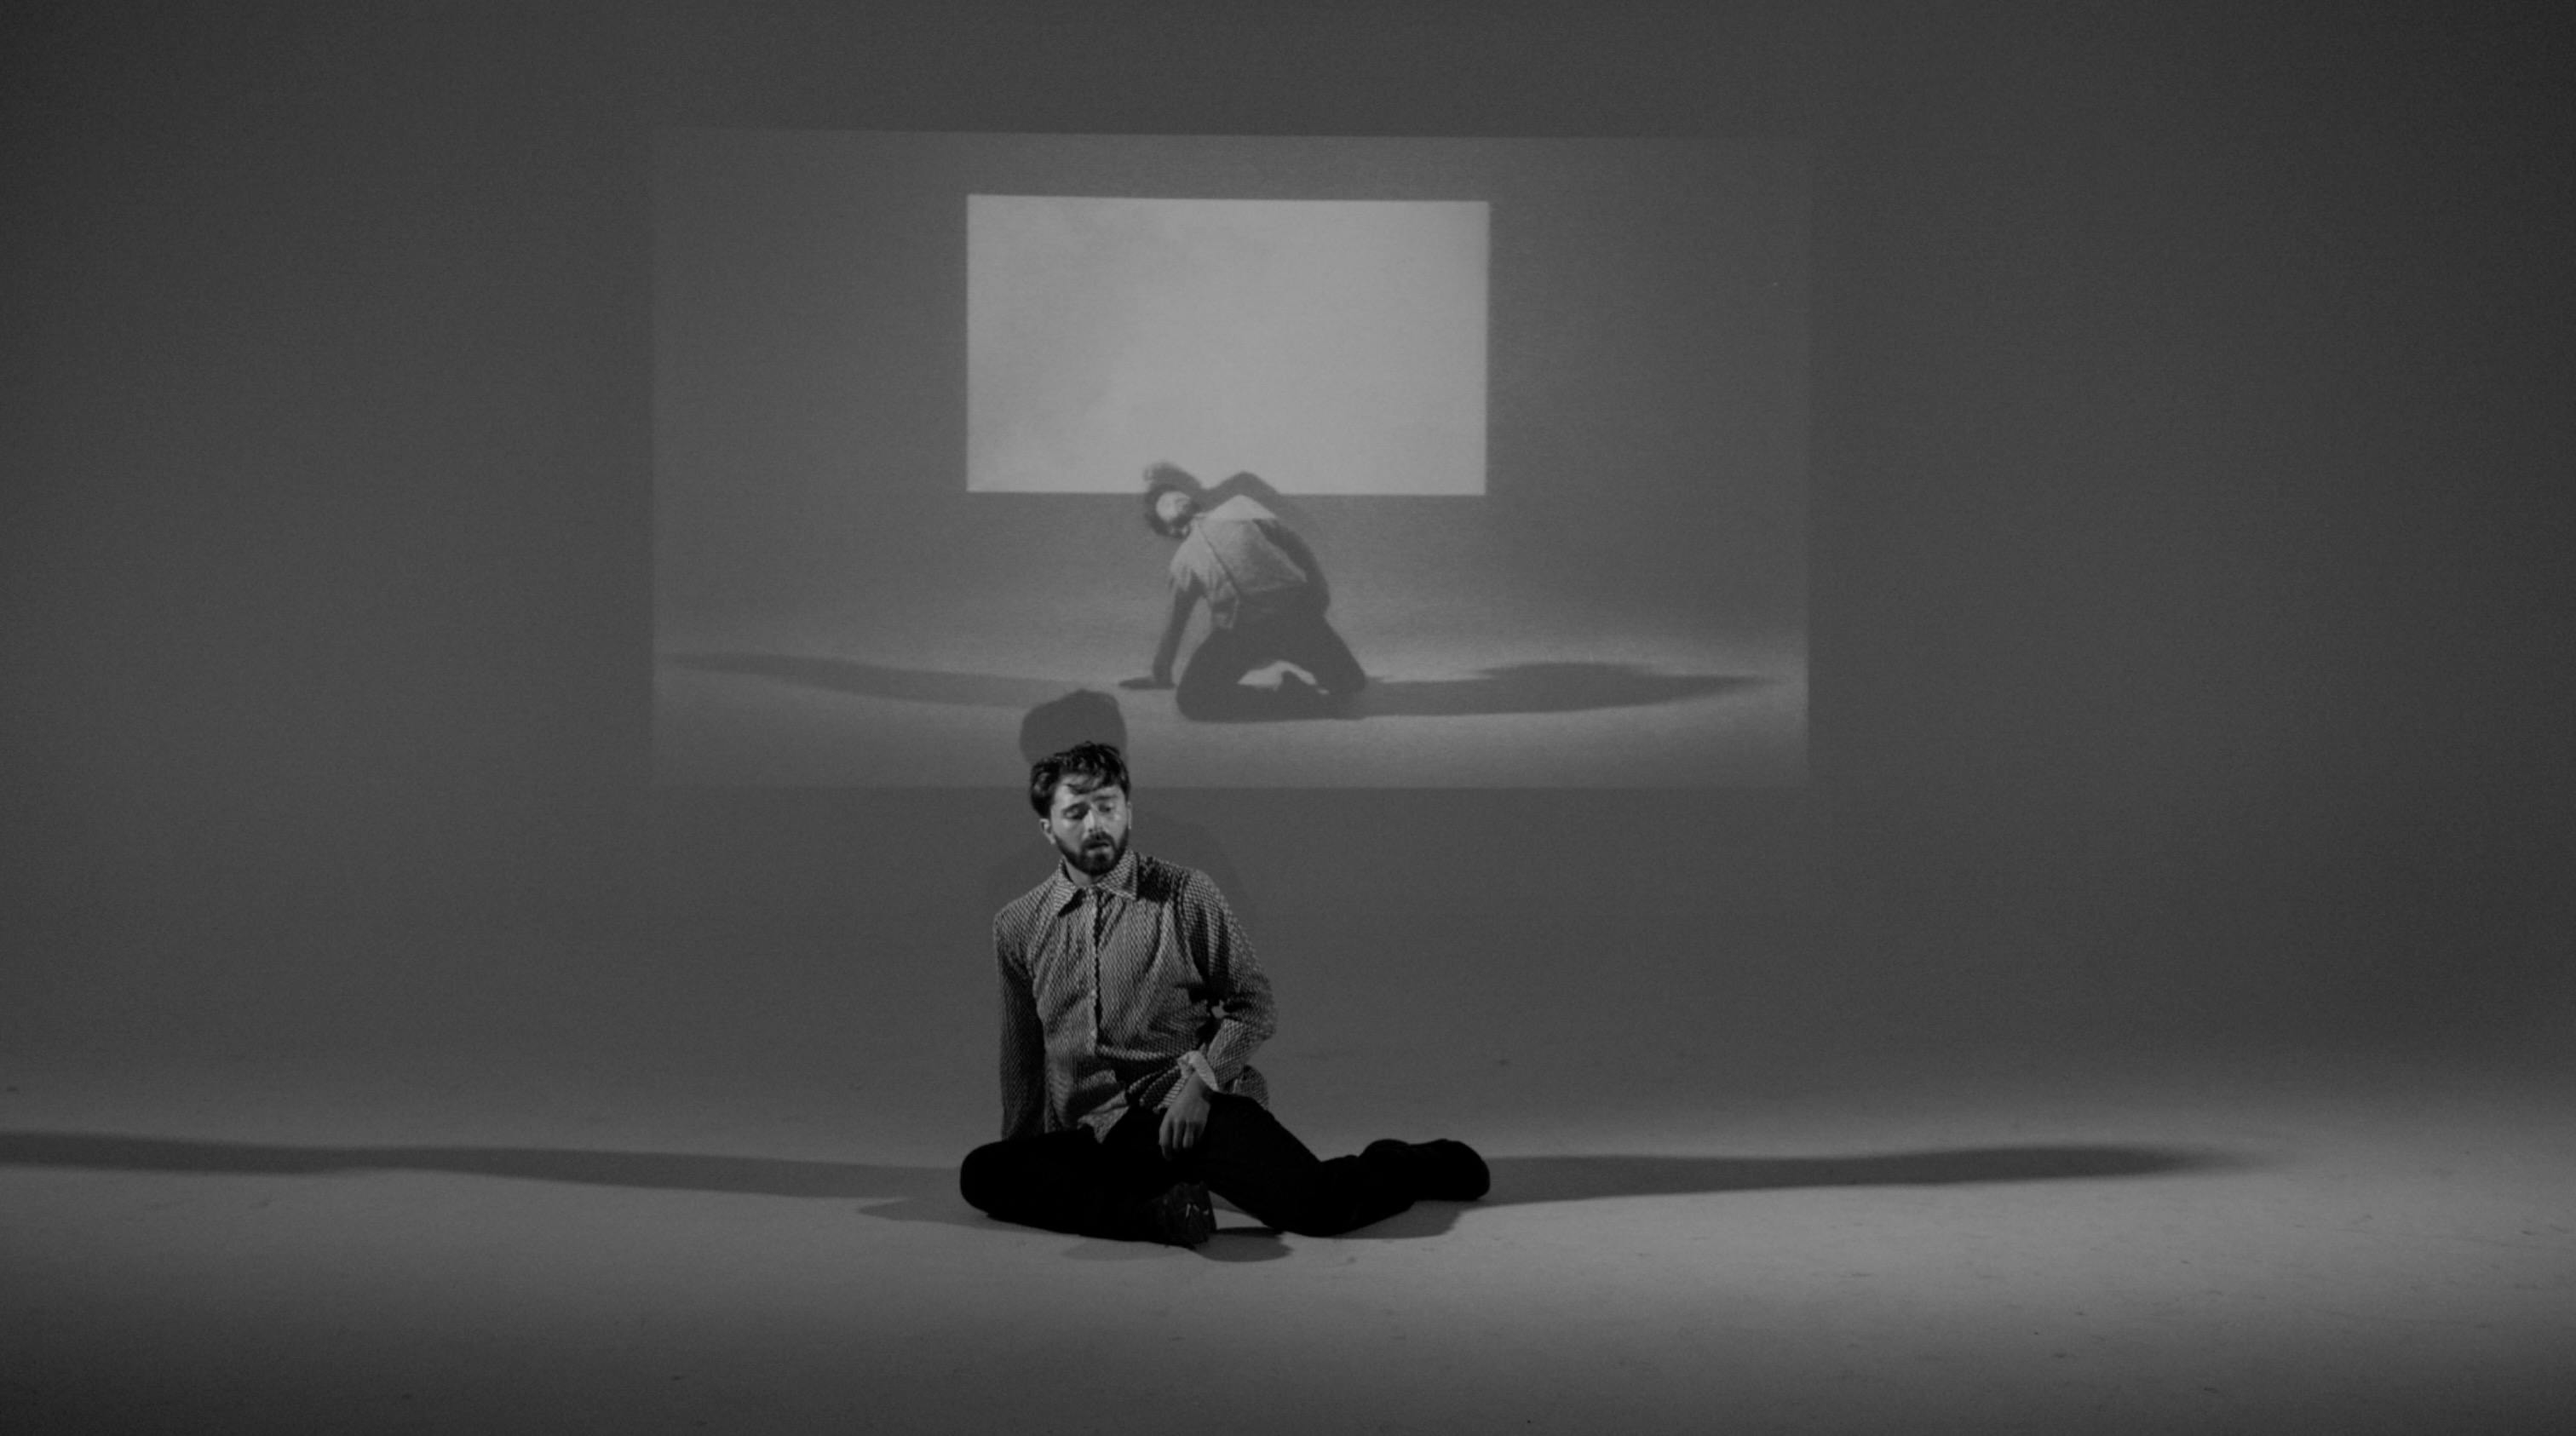 Simone Donati in a black and white photograph wears a shirt and is sitting on the floor, a projector shows the same scene behind him